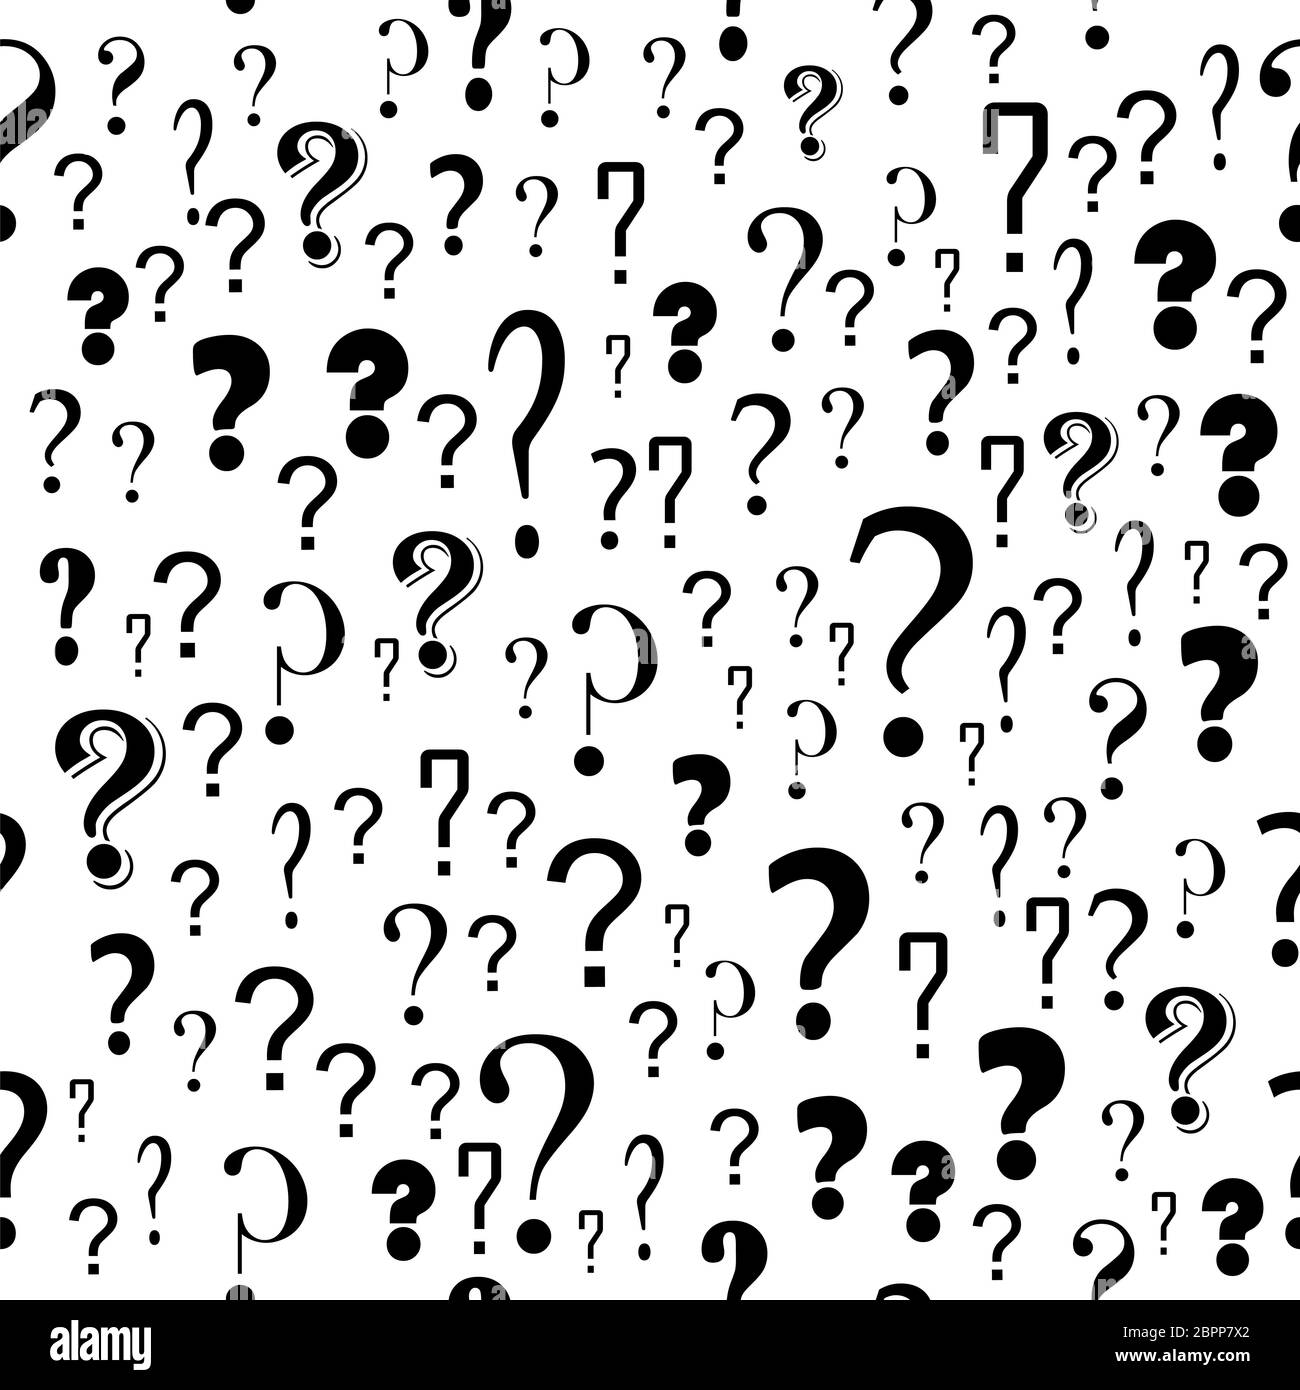 Question Mark Seamless Pattern on White Background. Simple icon for ...